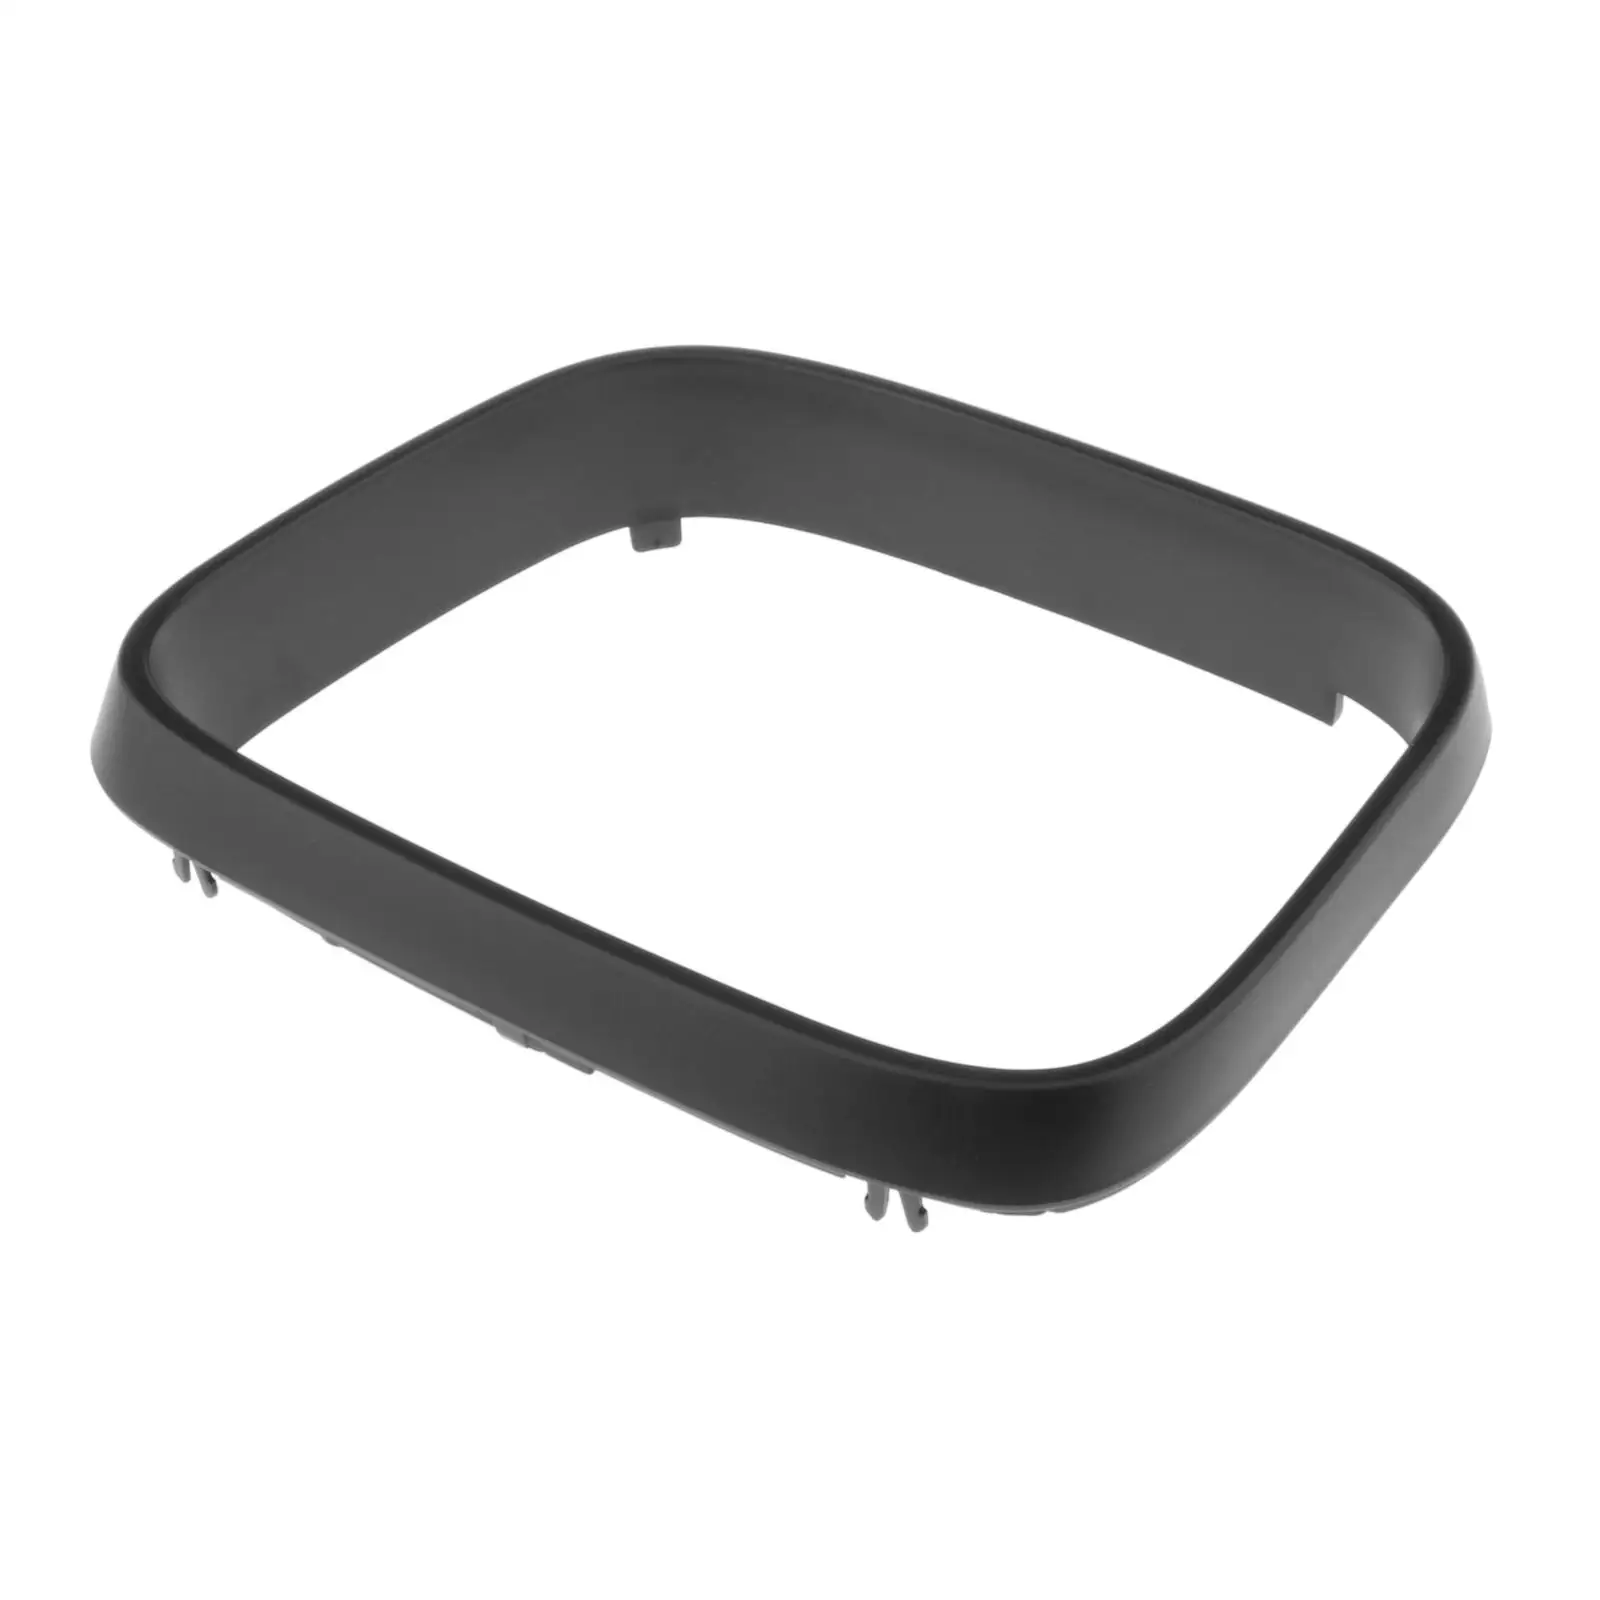 Rear View Right Side Door Mirror Housing Frame Cover Cap Trim, for VW Caddy and Maxi 2004 - Current Cars Accessory, Black